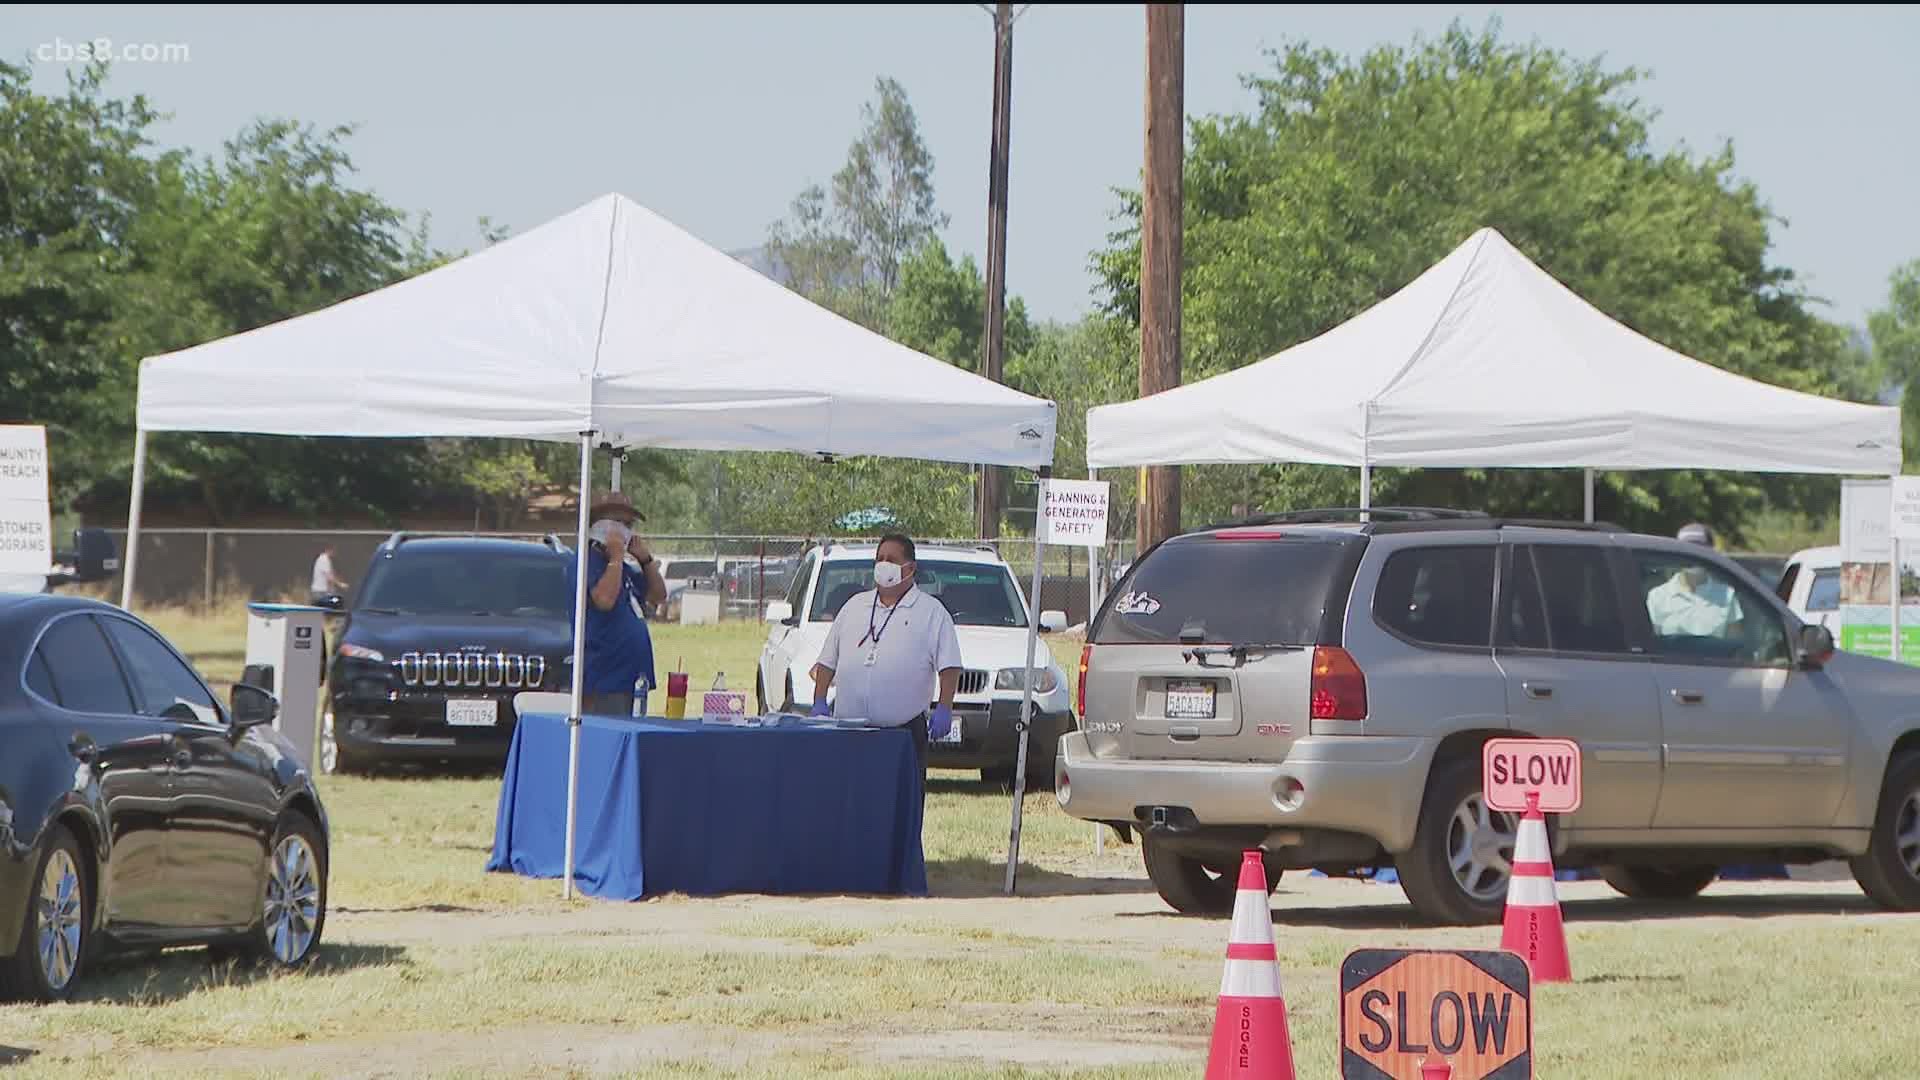 SDG&E will hold another drive thru event next week in Julian and then two more events in September.